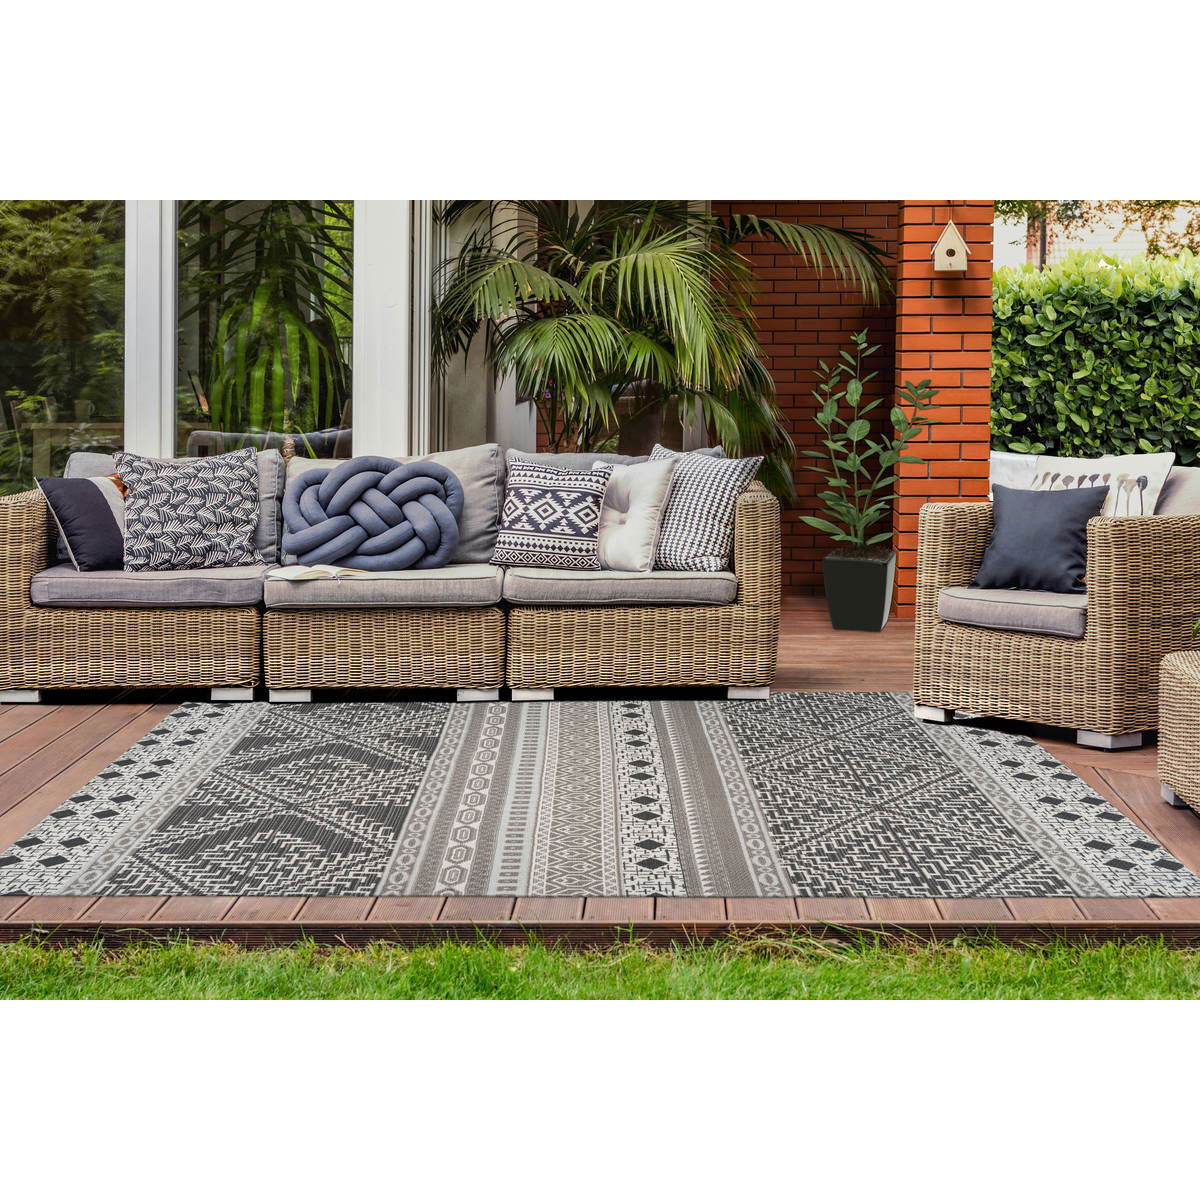 Outdoor-Teppich „Yoga 200“, taupe/creme | | K000035461 80x150